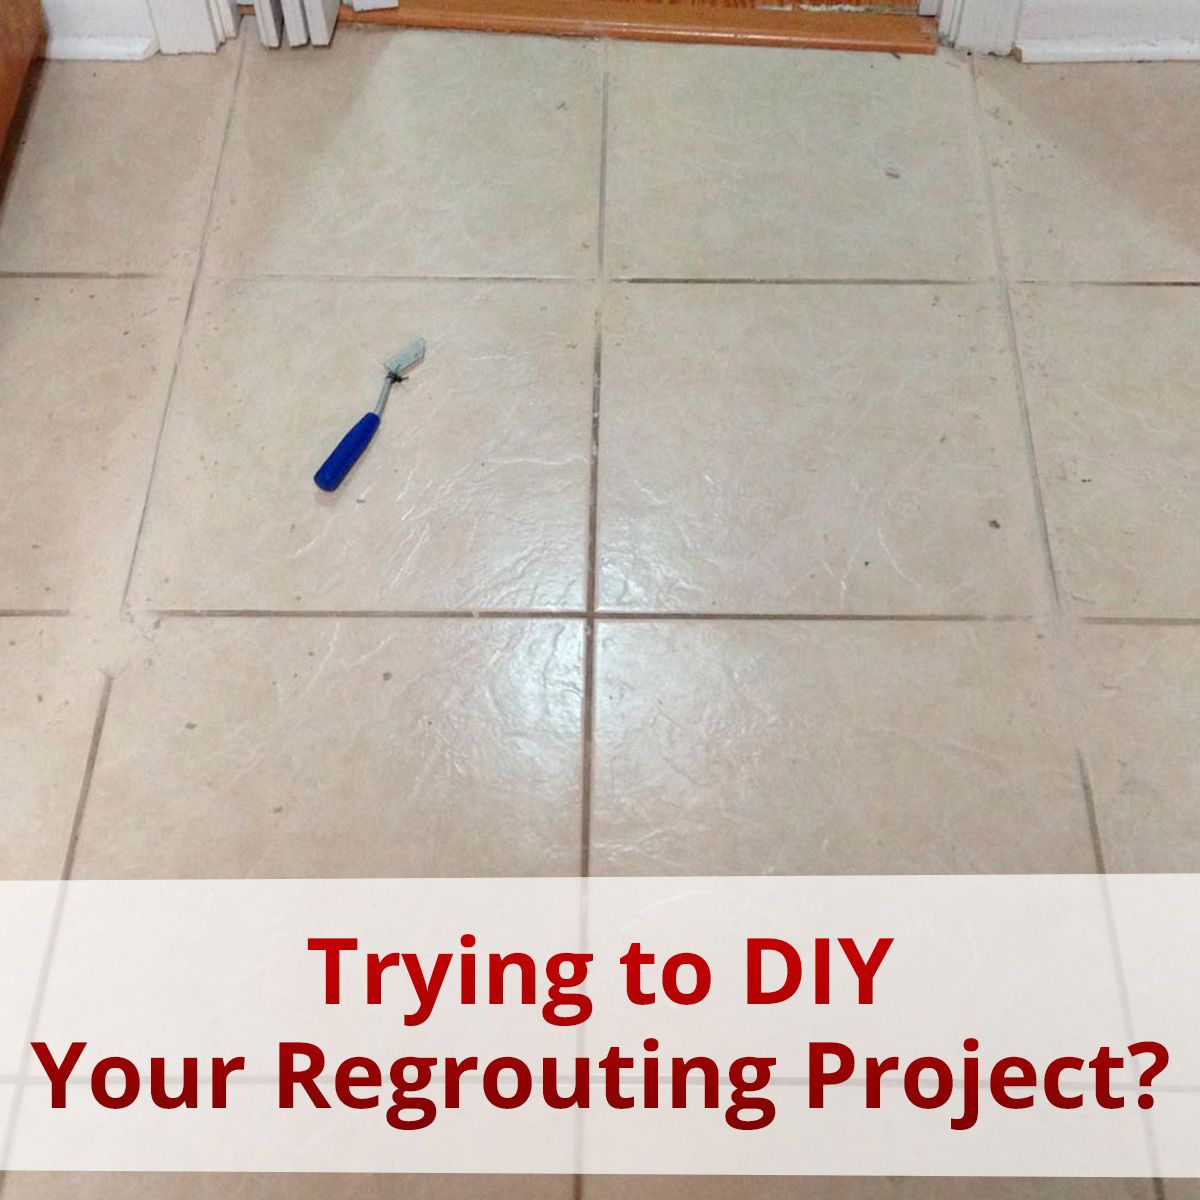 Trying to DIY Your Regrouting Project?